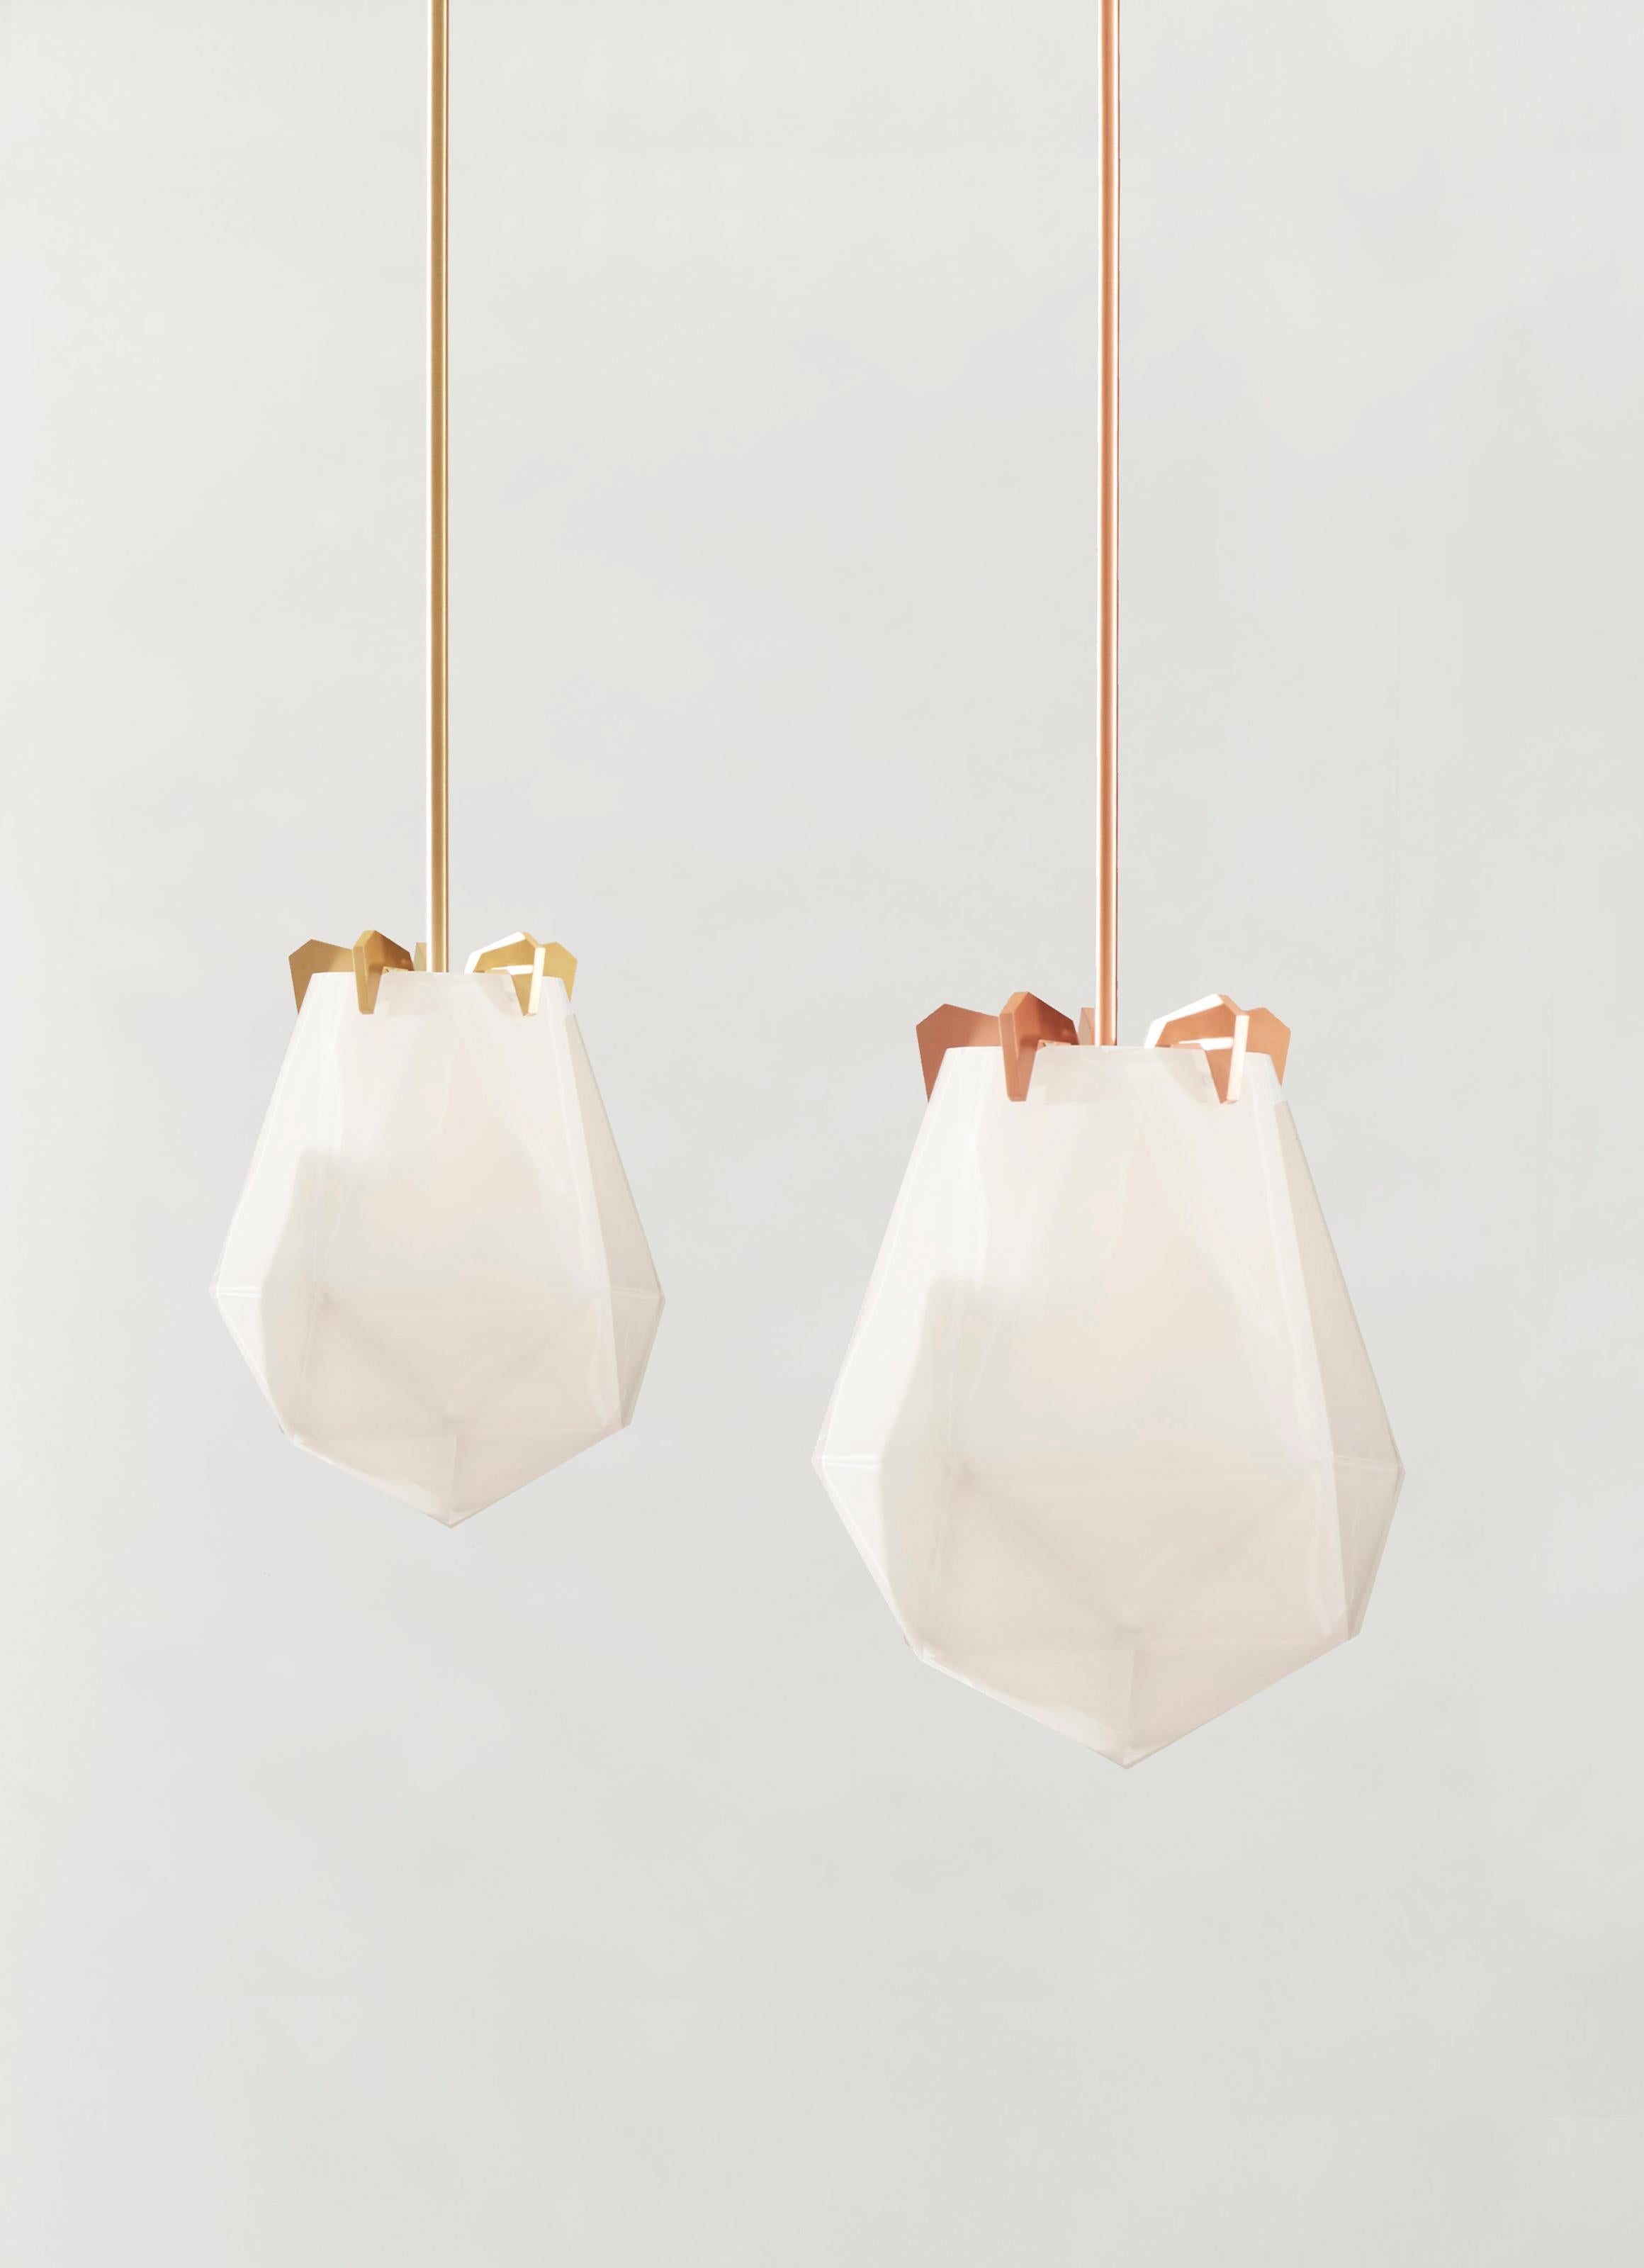 A powerful warm light diffused through double-blown glass, the Briolette showcases striking prismatic contours held by the brand’s signature metallic prongs. A dynamic interplay of sharp and delicate, the satin brass, nickel, and copper, or black